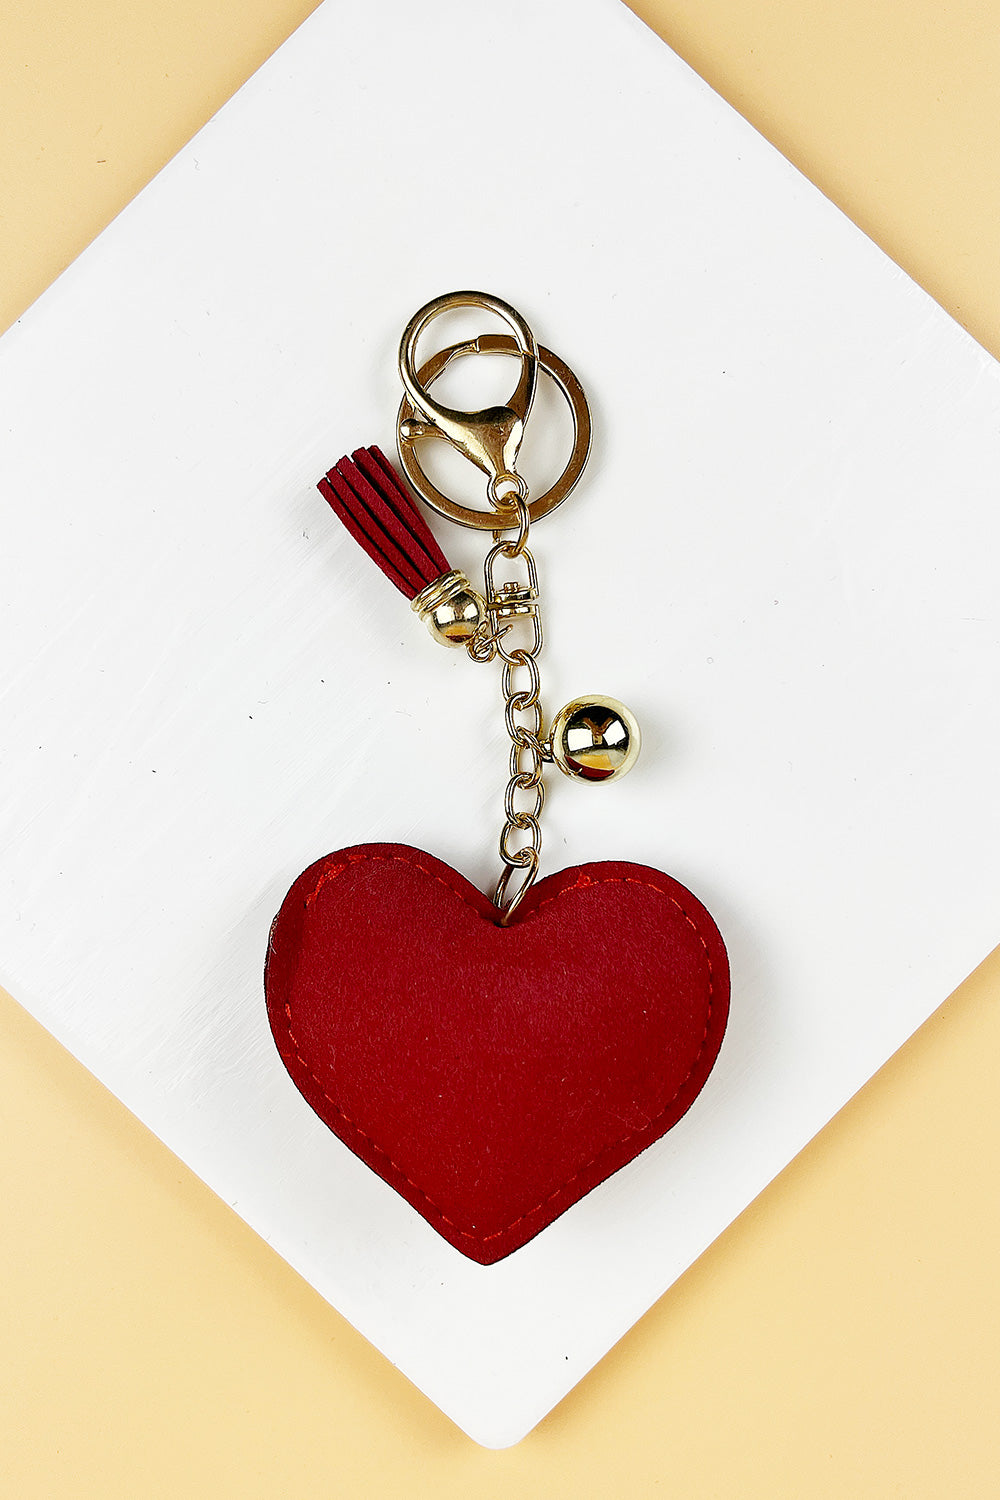 Red Heart Keychain Goldtone Metal Rhinestone Paved Puffy Keyring Clip Love  Gift